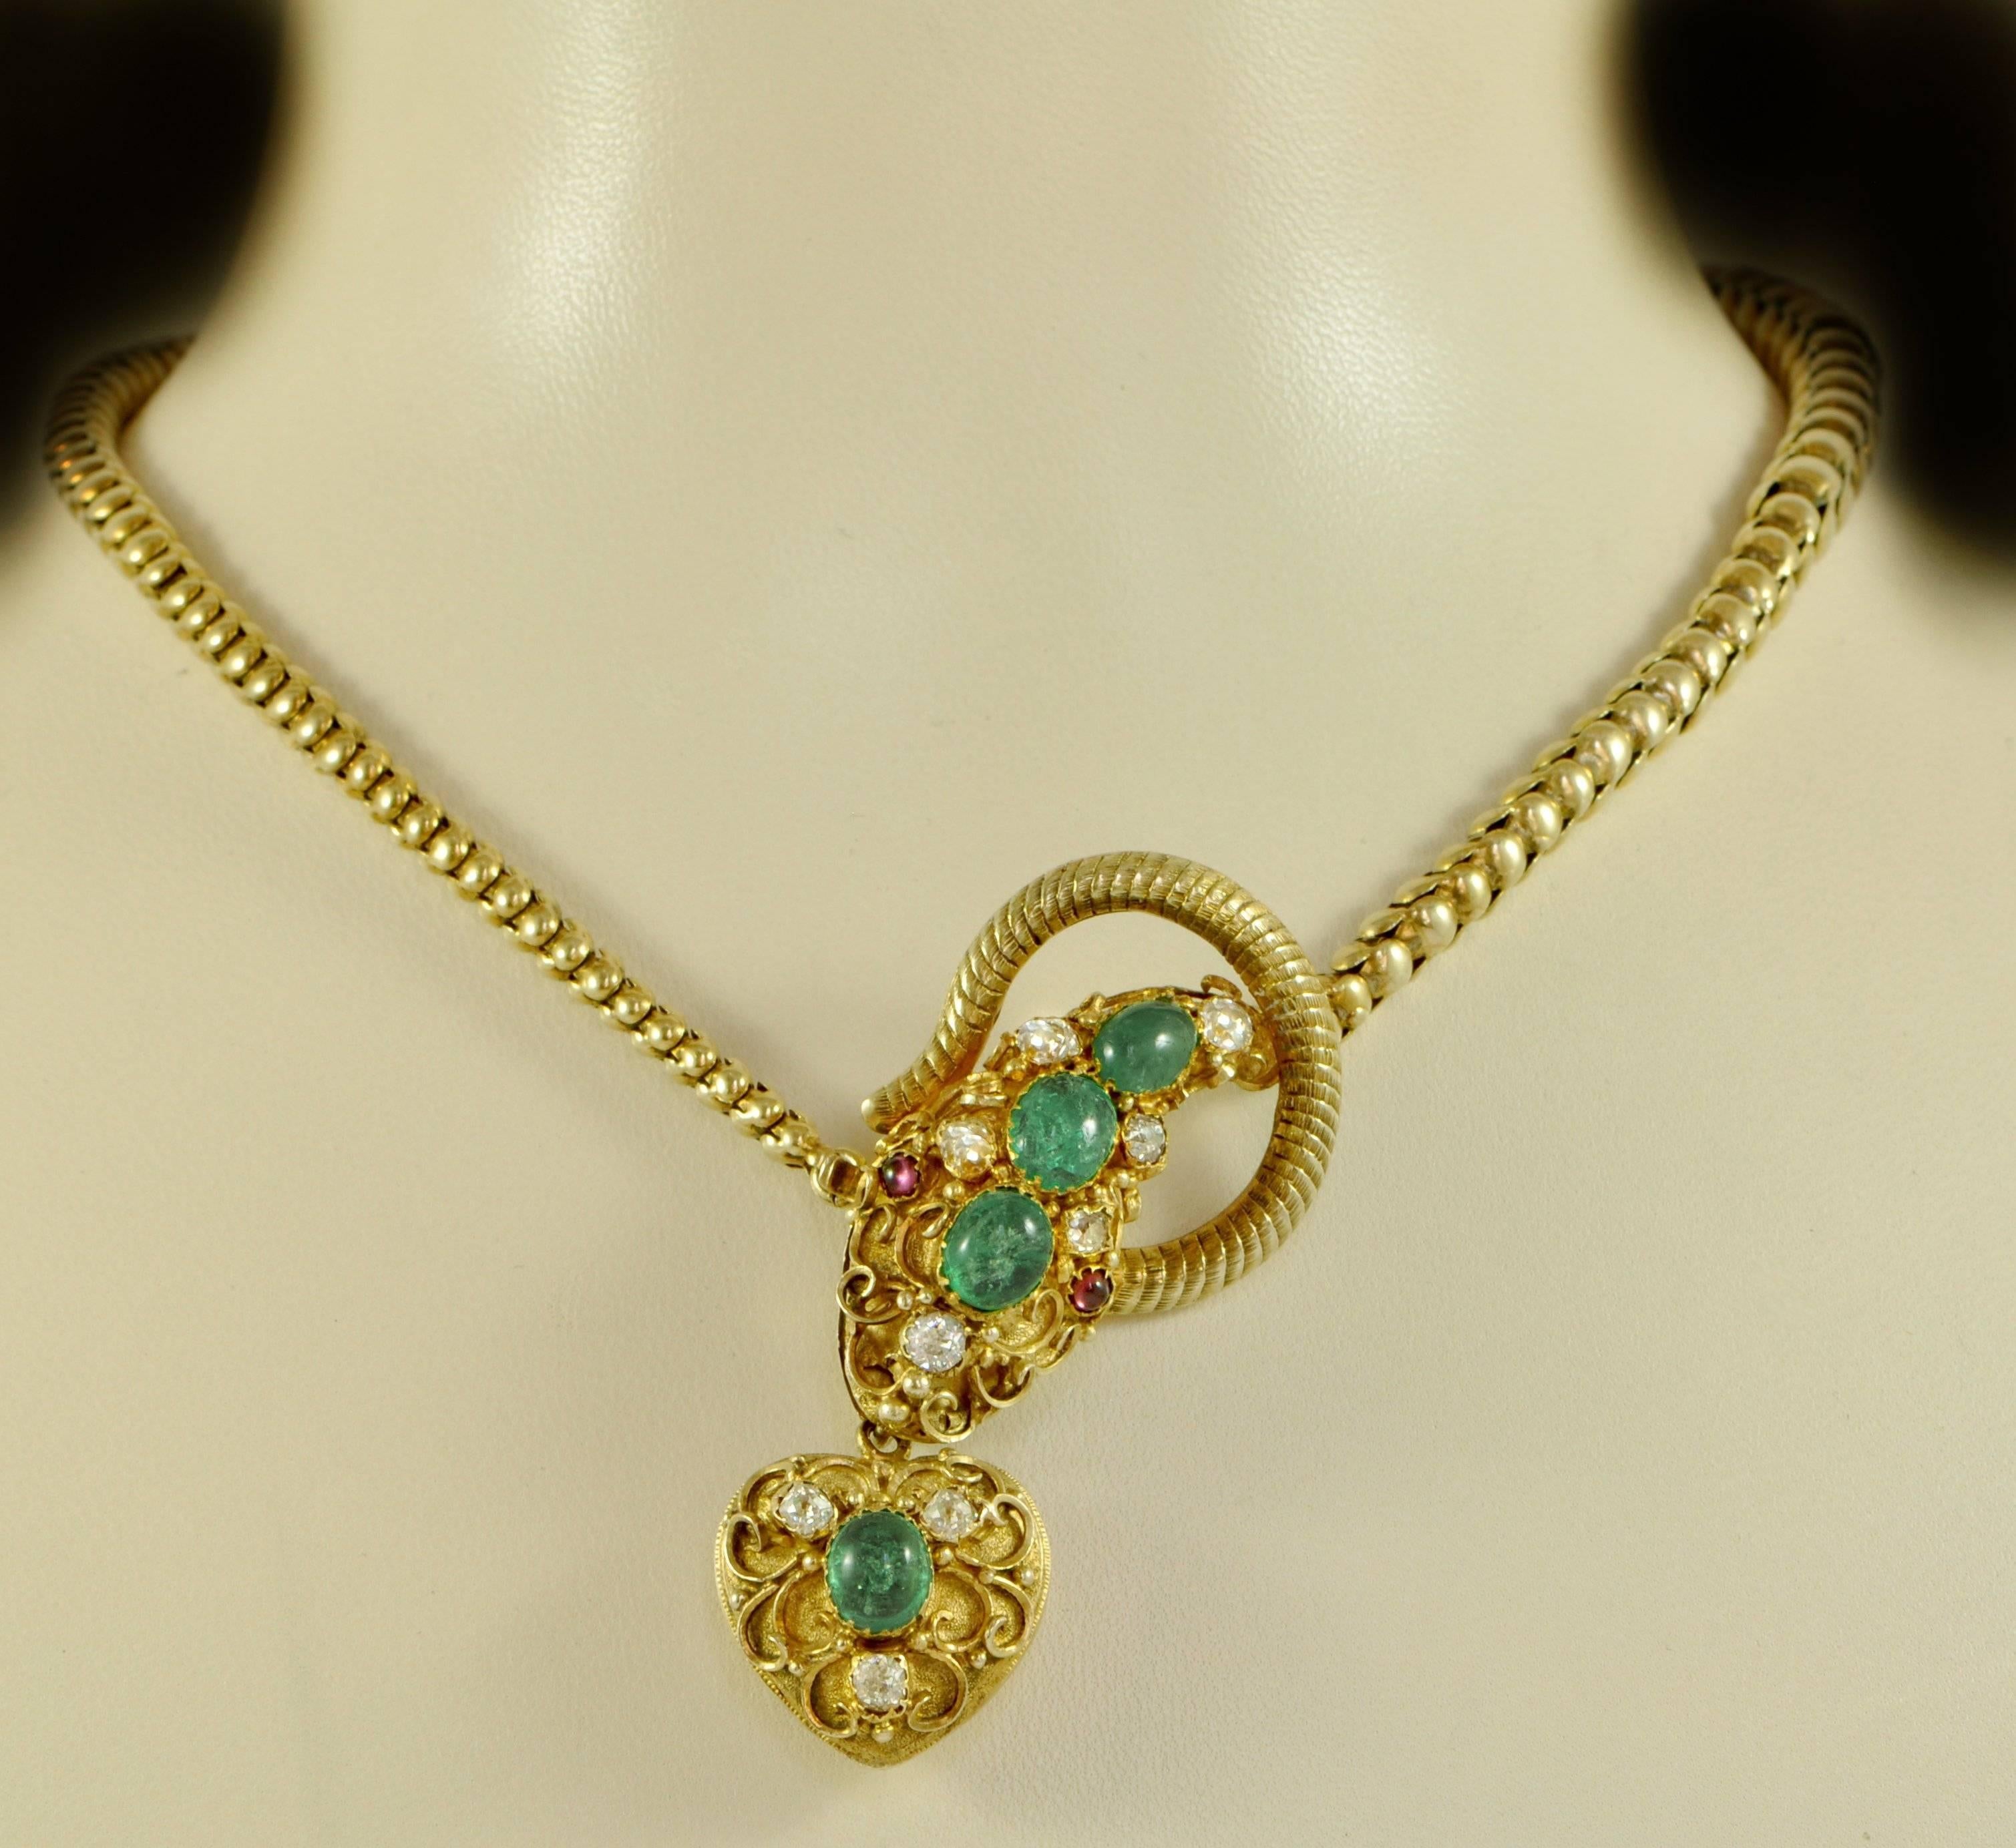 A Victorian 15ct gold snake necklace, set with cabochon emeralds and diamonds, with cabochon ruby eyes.